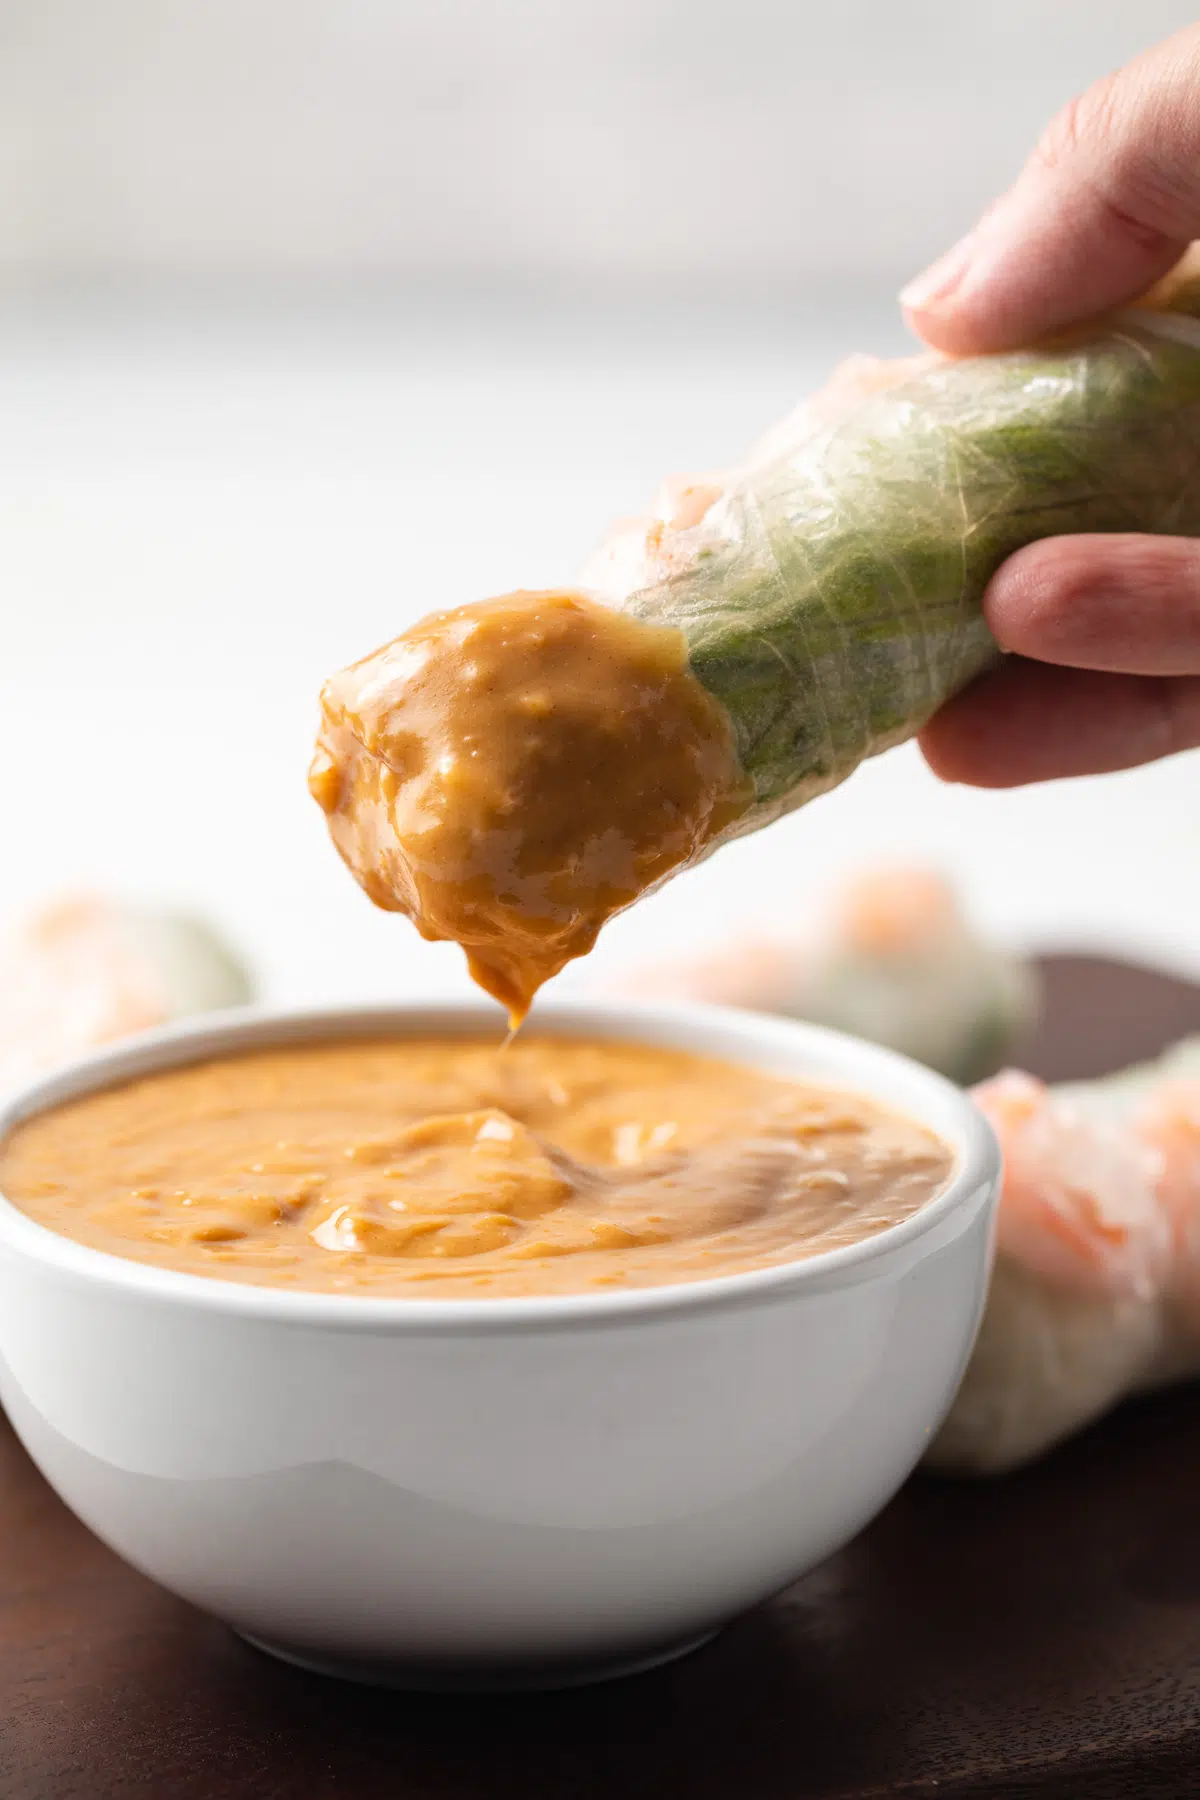 Spring roll dipped into peanut sauce.